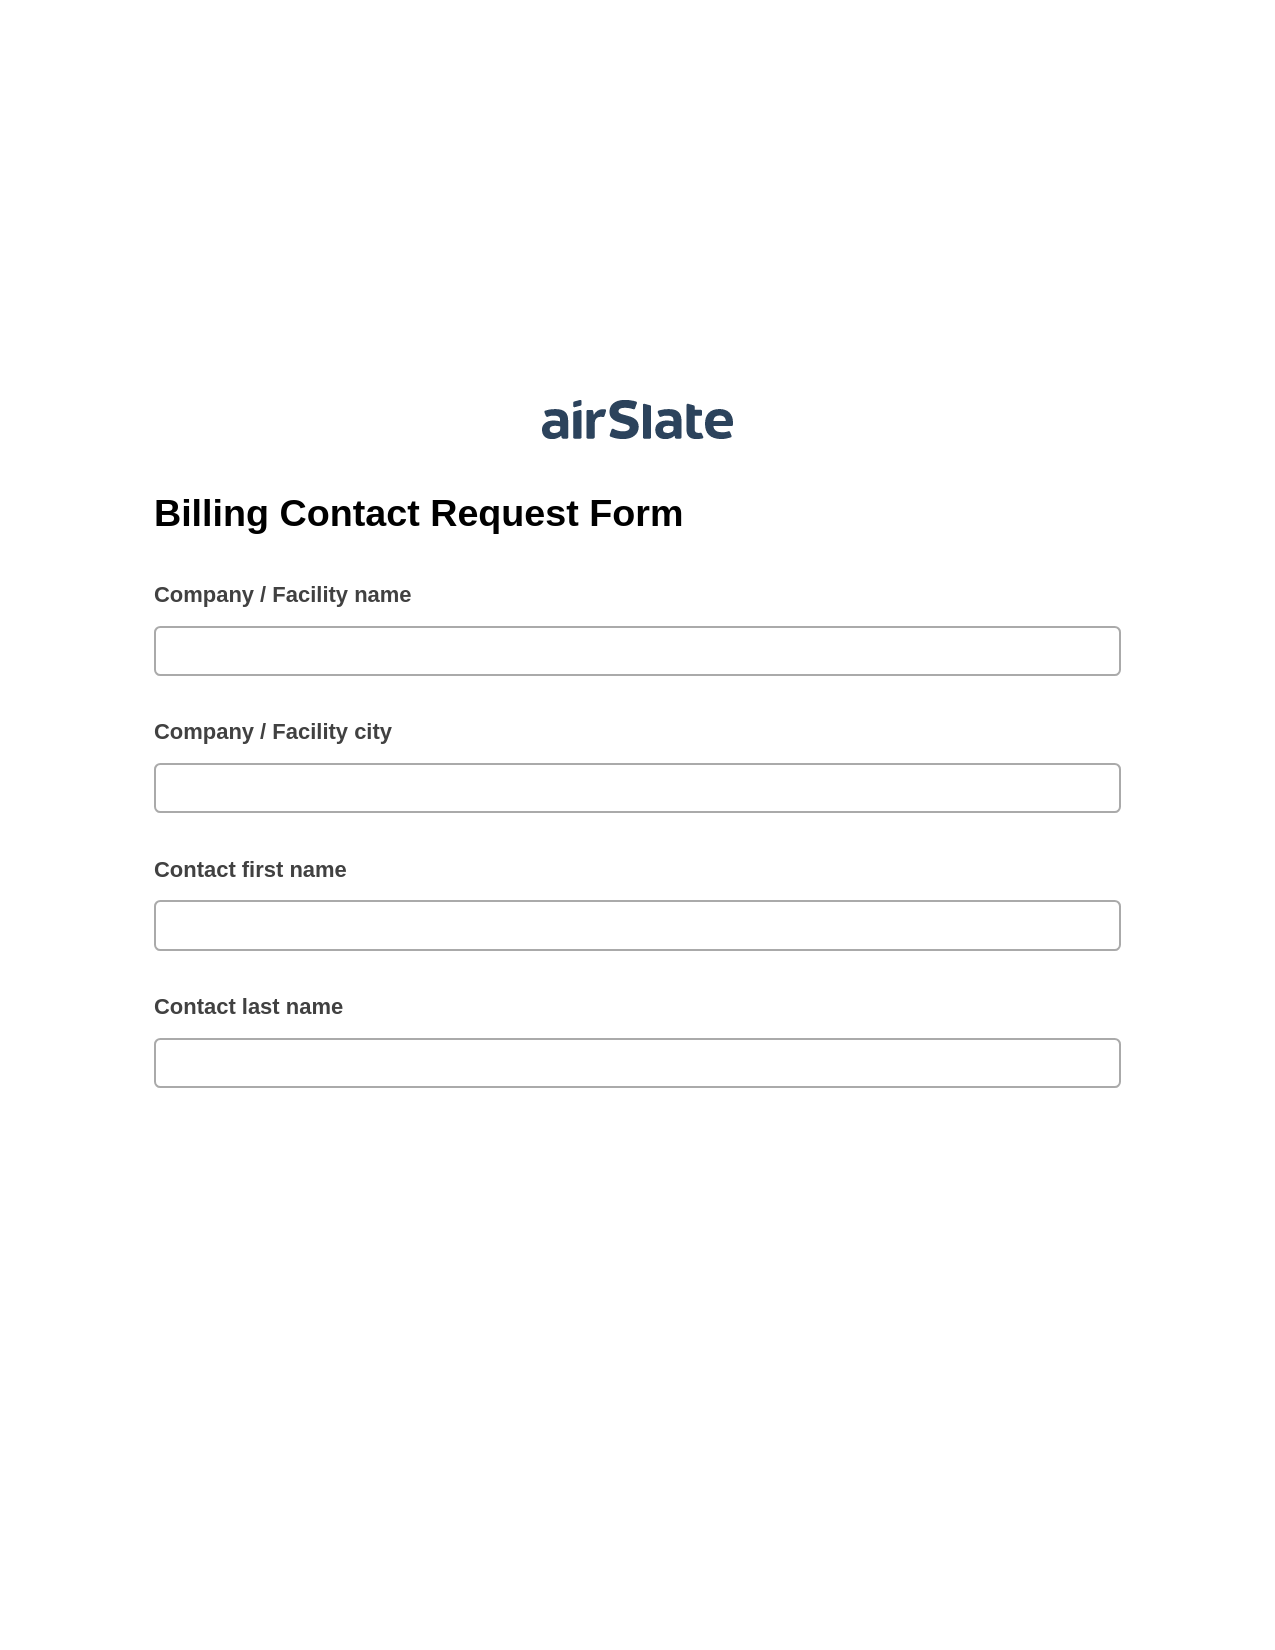 Multirole Billing Contact Request Form Pre-fill Dropdowns from Smartsheet Bot, Update MS Dynamics 365 Records Bot, Export to Google Sheet Bot